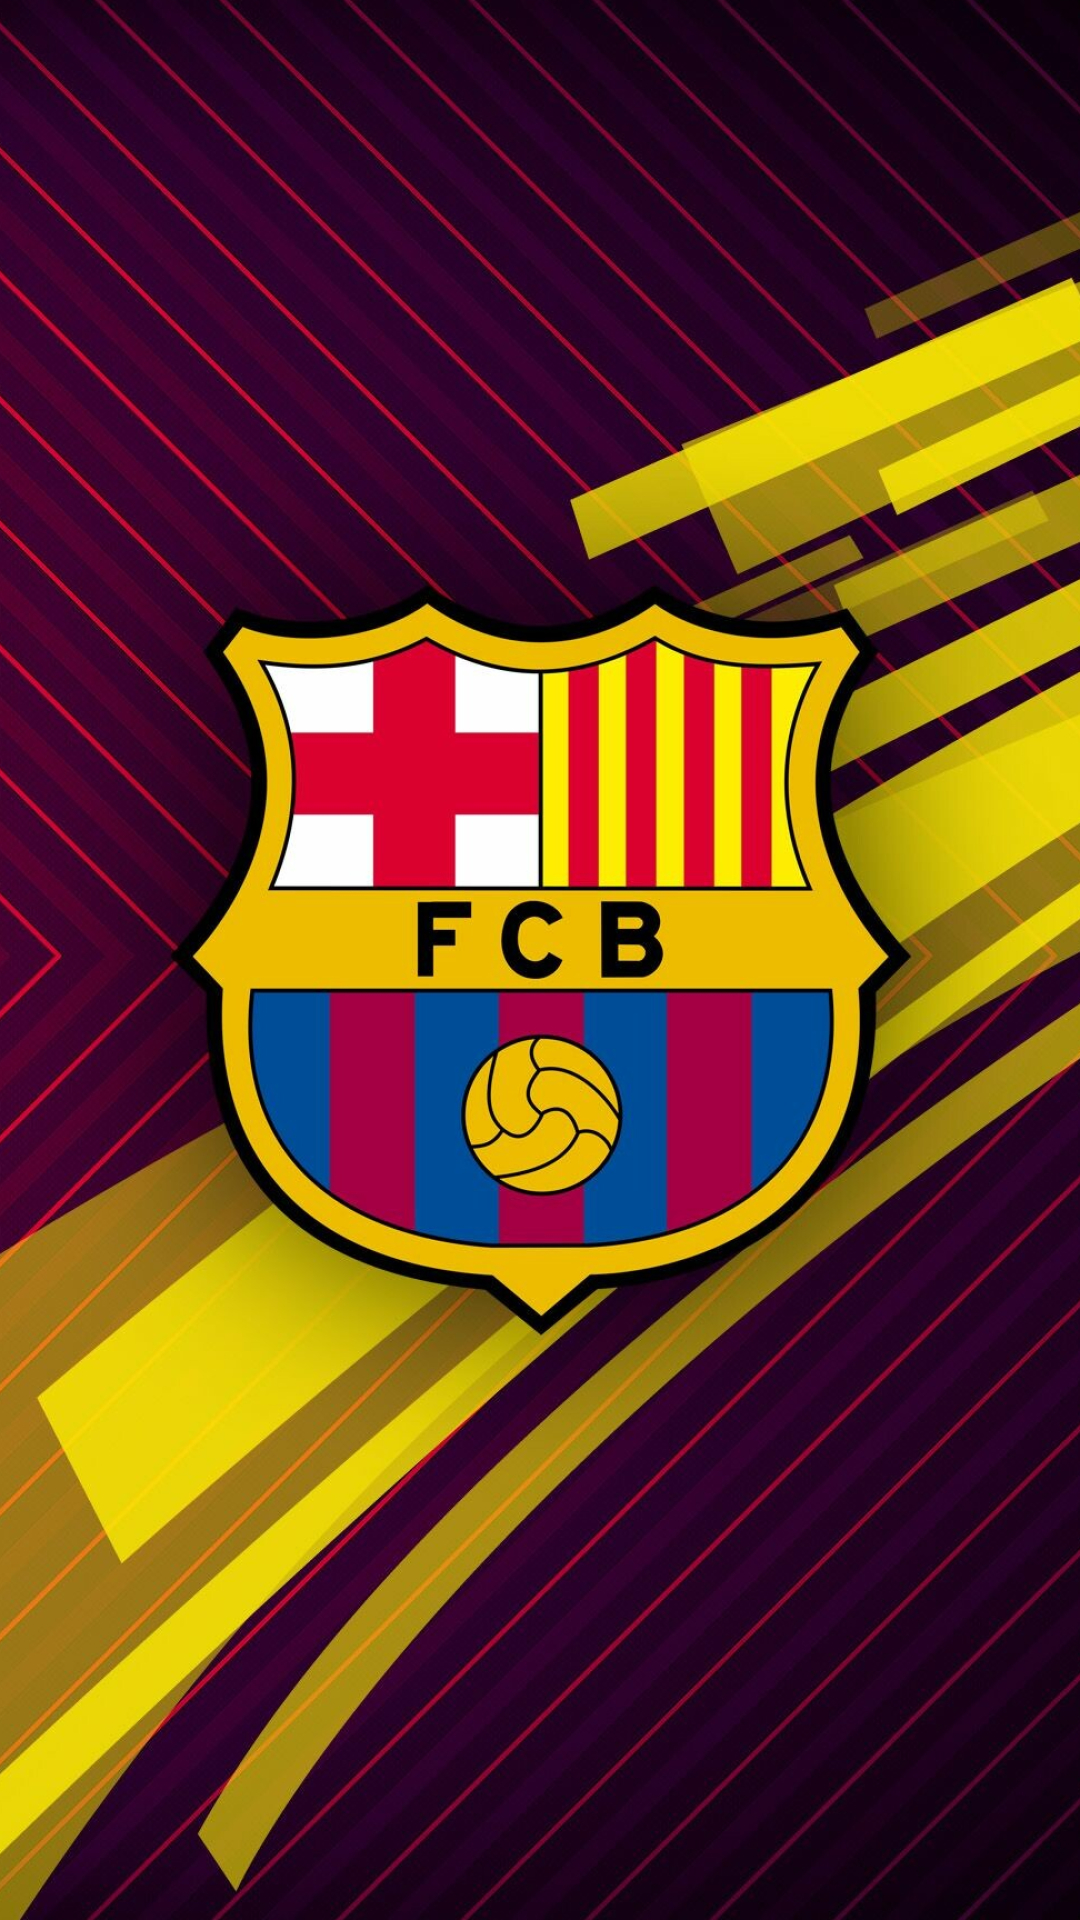 FC Barcelona: The only European club to have played continental football every season since 1955. 1080x1920 Full HD Background.